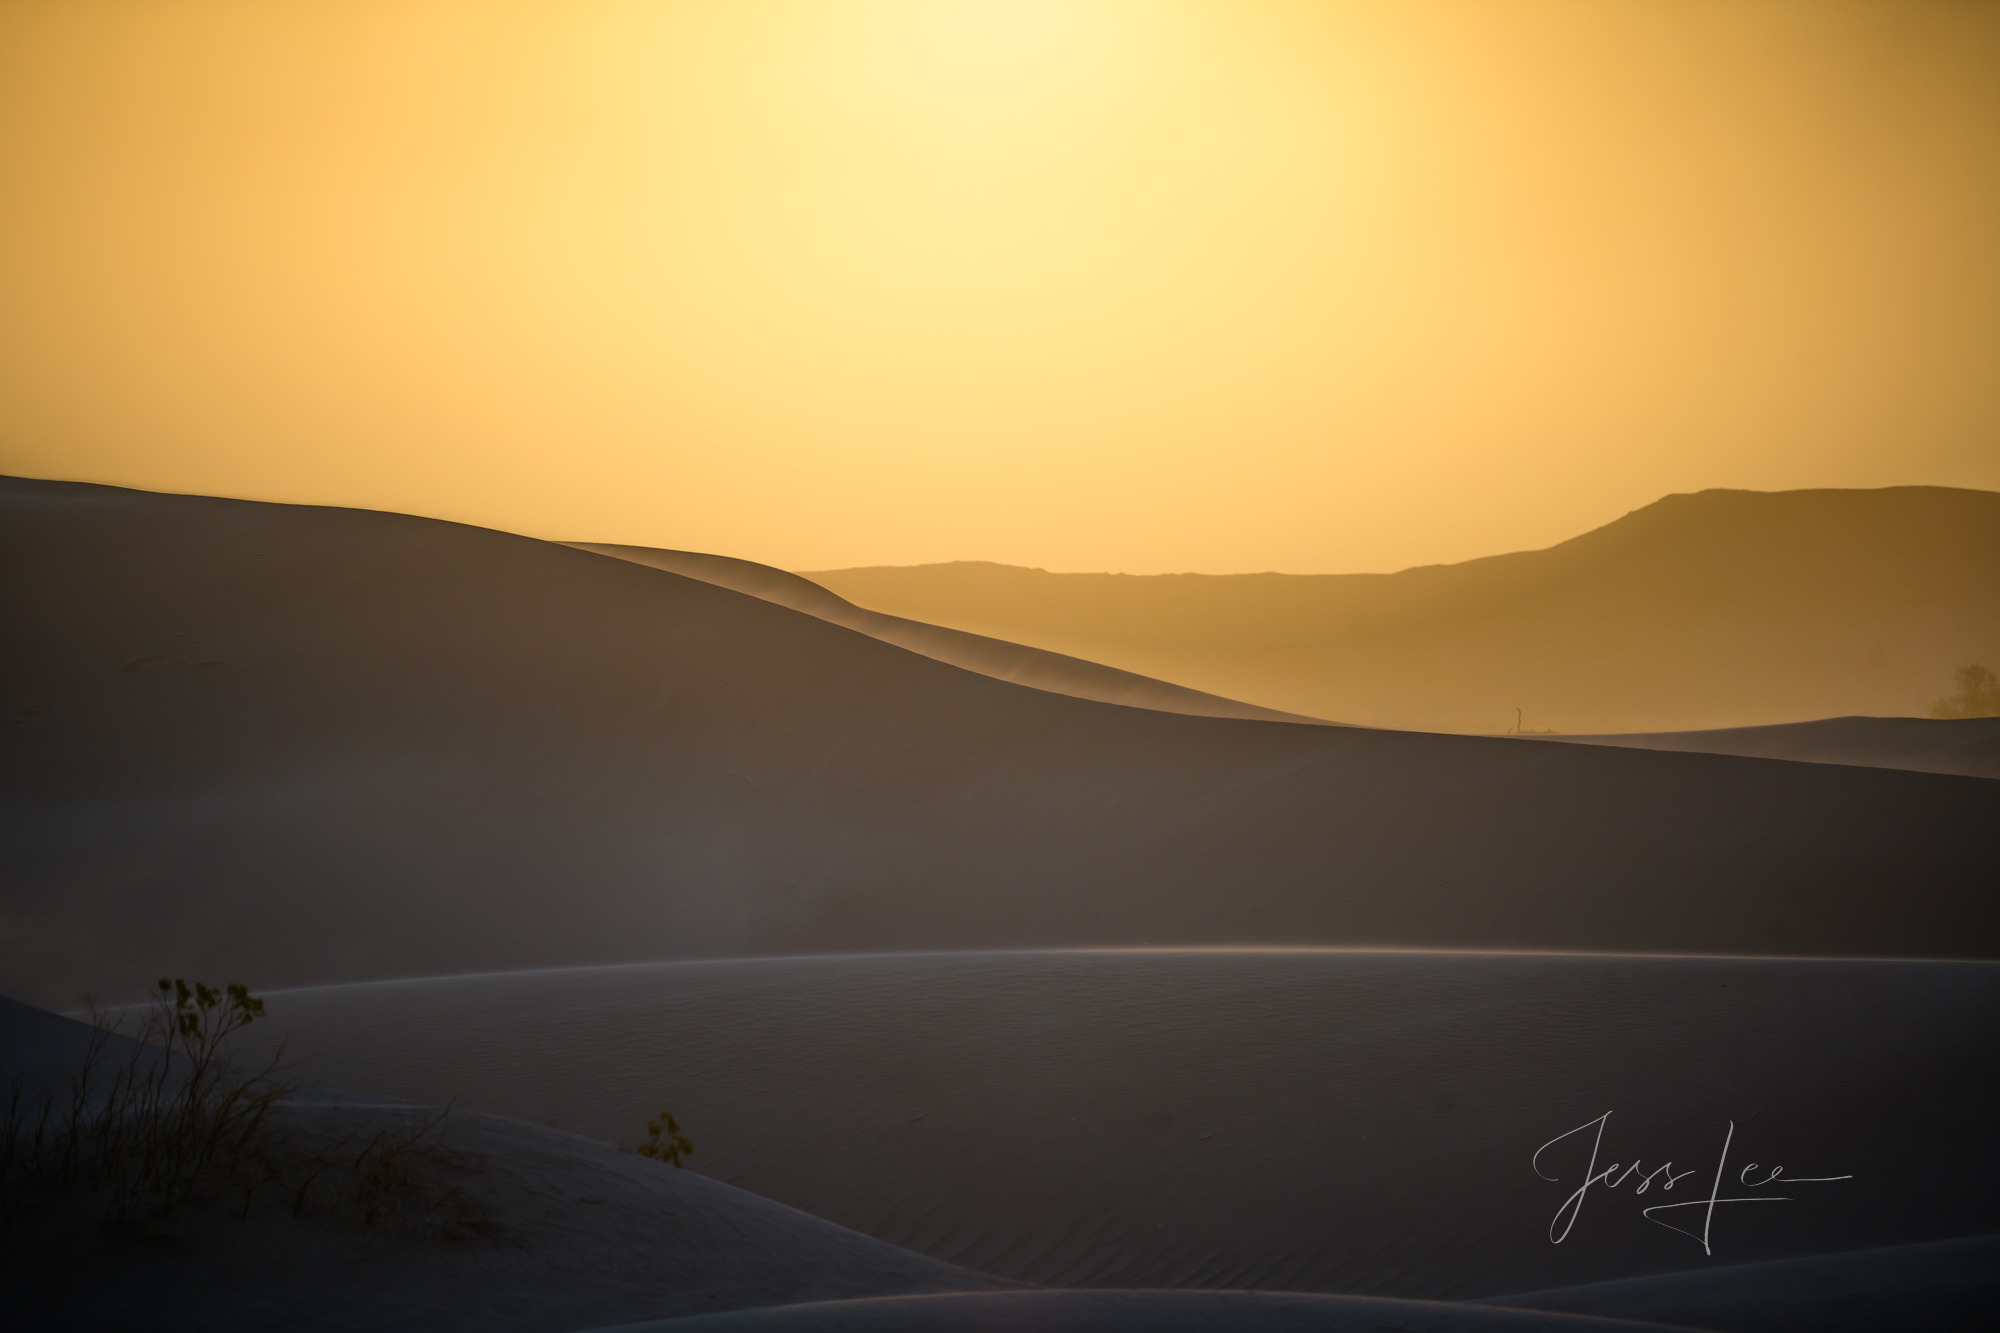 Just Making it ! a Fine Art Limited Edition Photo Print from Death Valley National Park. Enjoy this beautiful piece of desert...